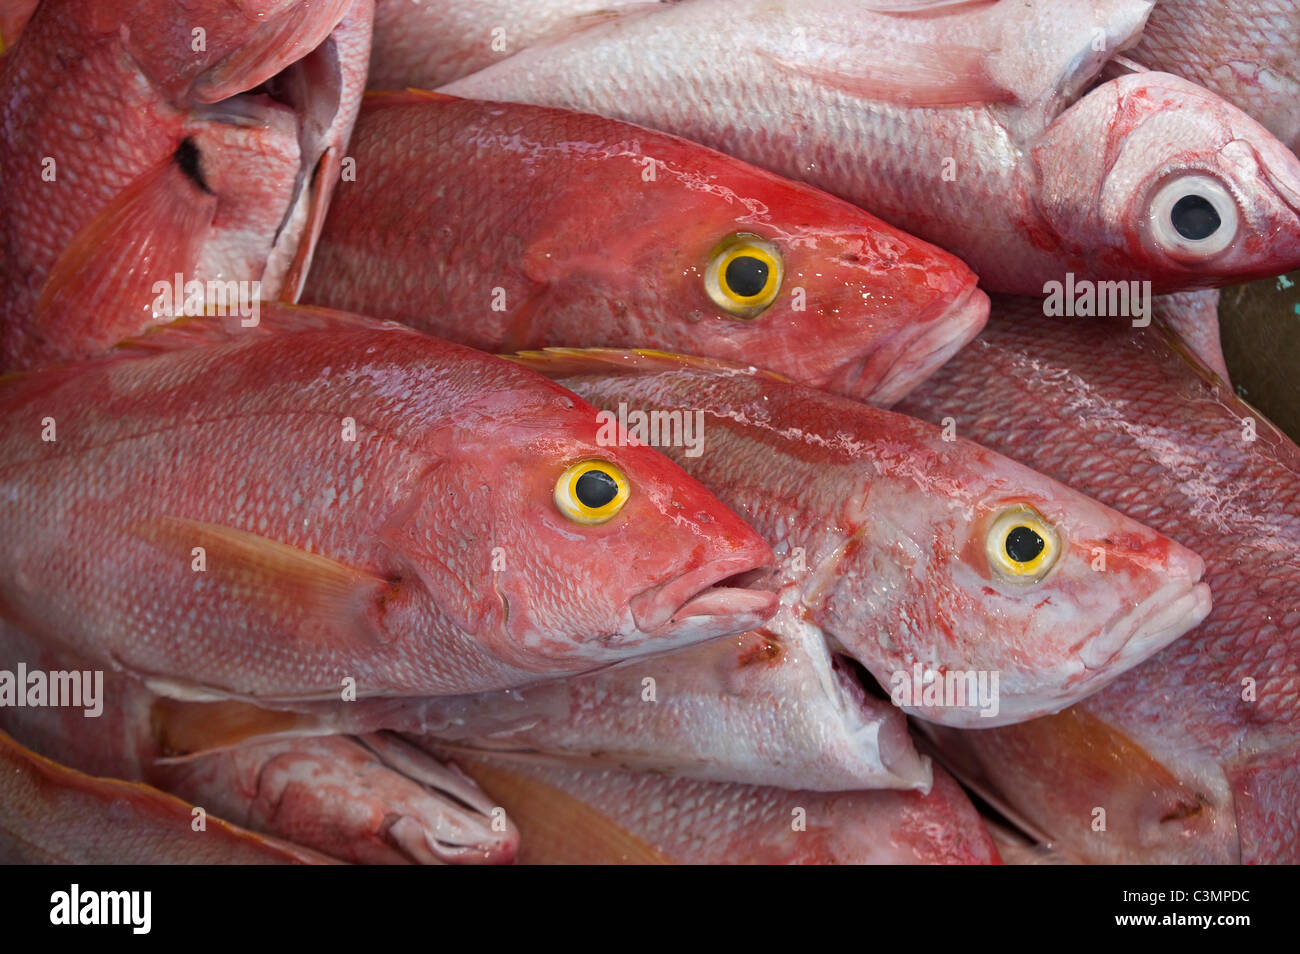 Red Snapper (Lutjanus campechanus). Dead individuals for sale on a market stall. Stock Photo